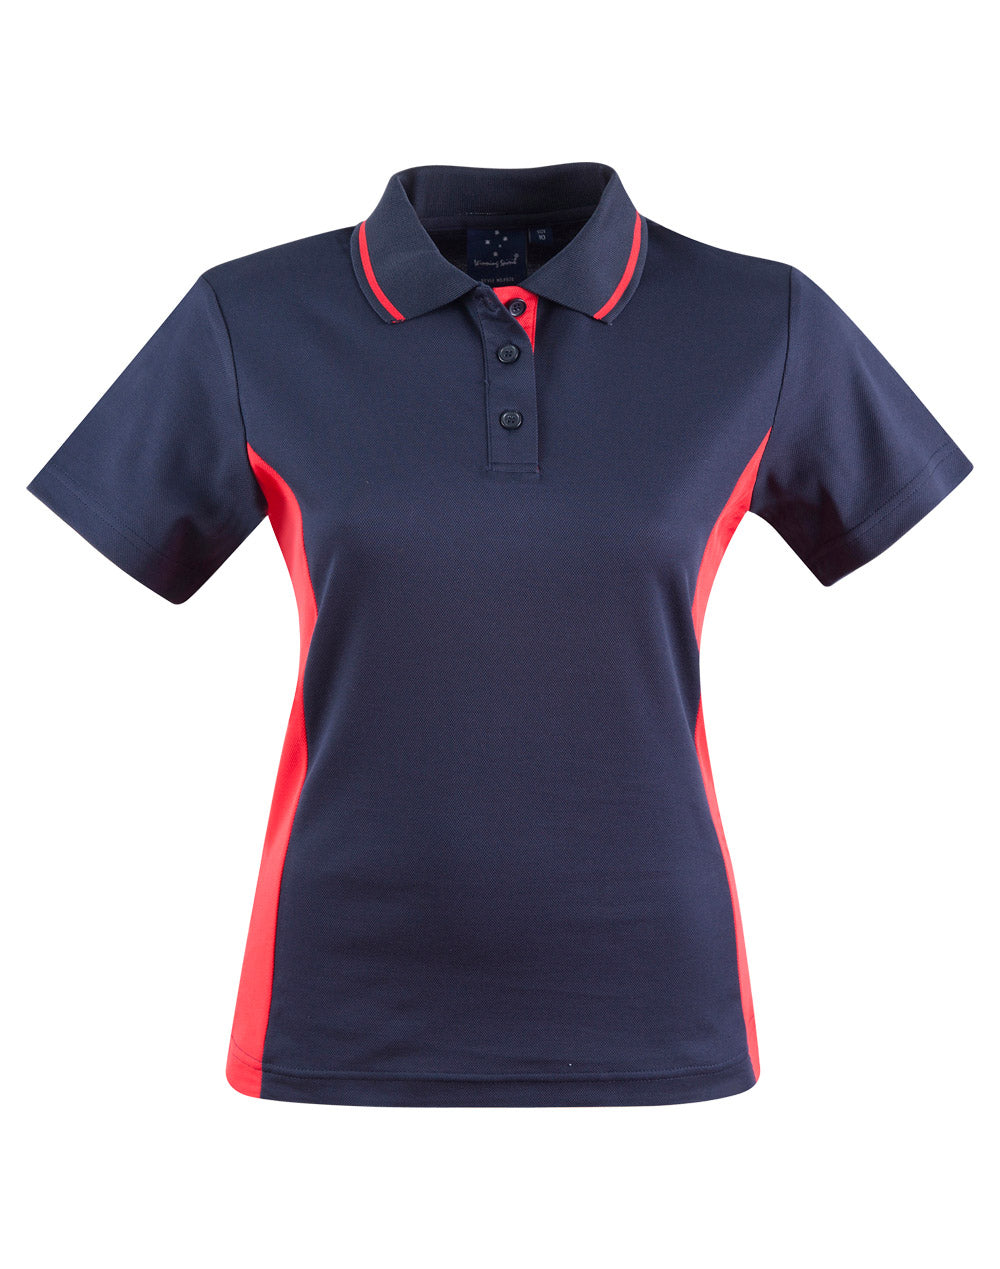 MBHS0017 RR POLO COTTON NAVY/RED - LADIES SIZE 8 - 18